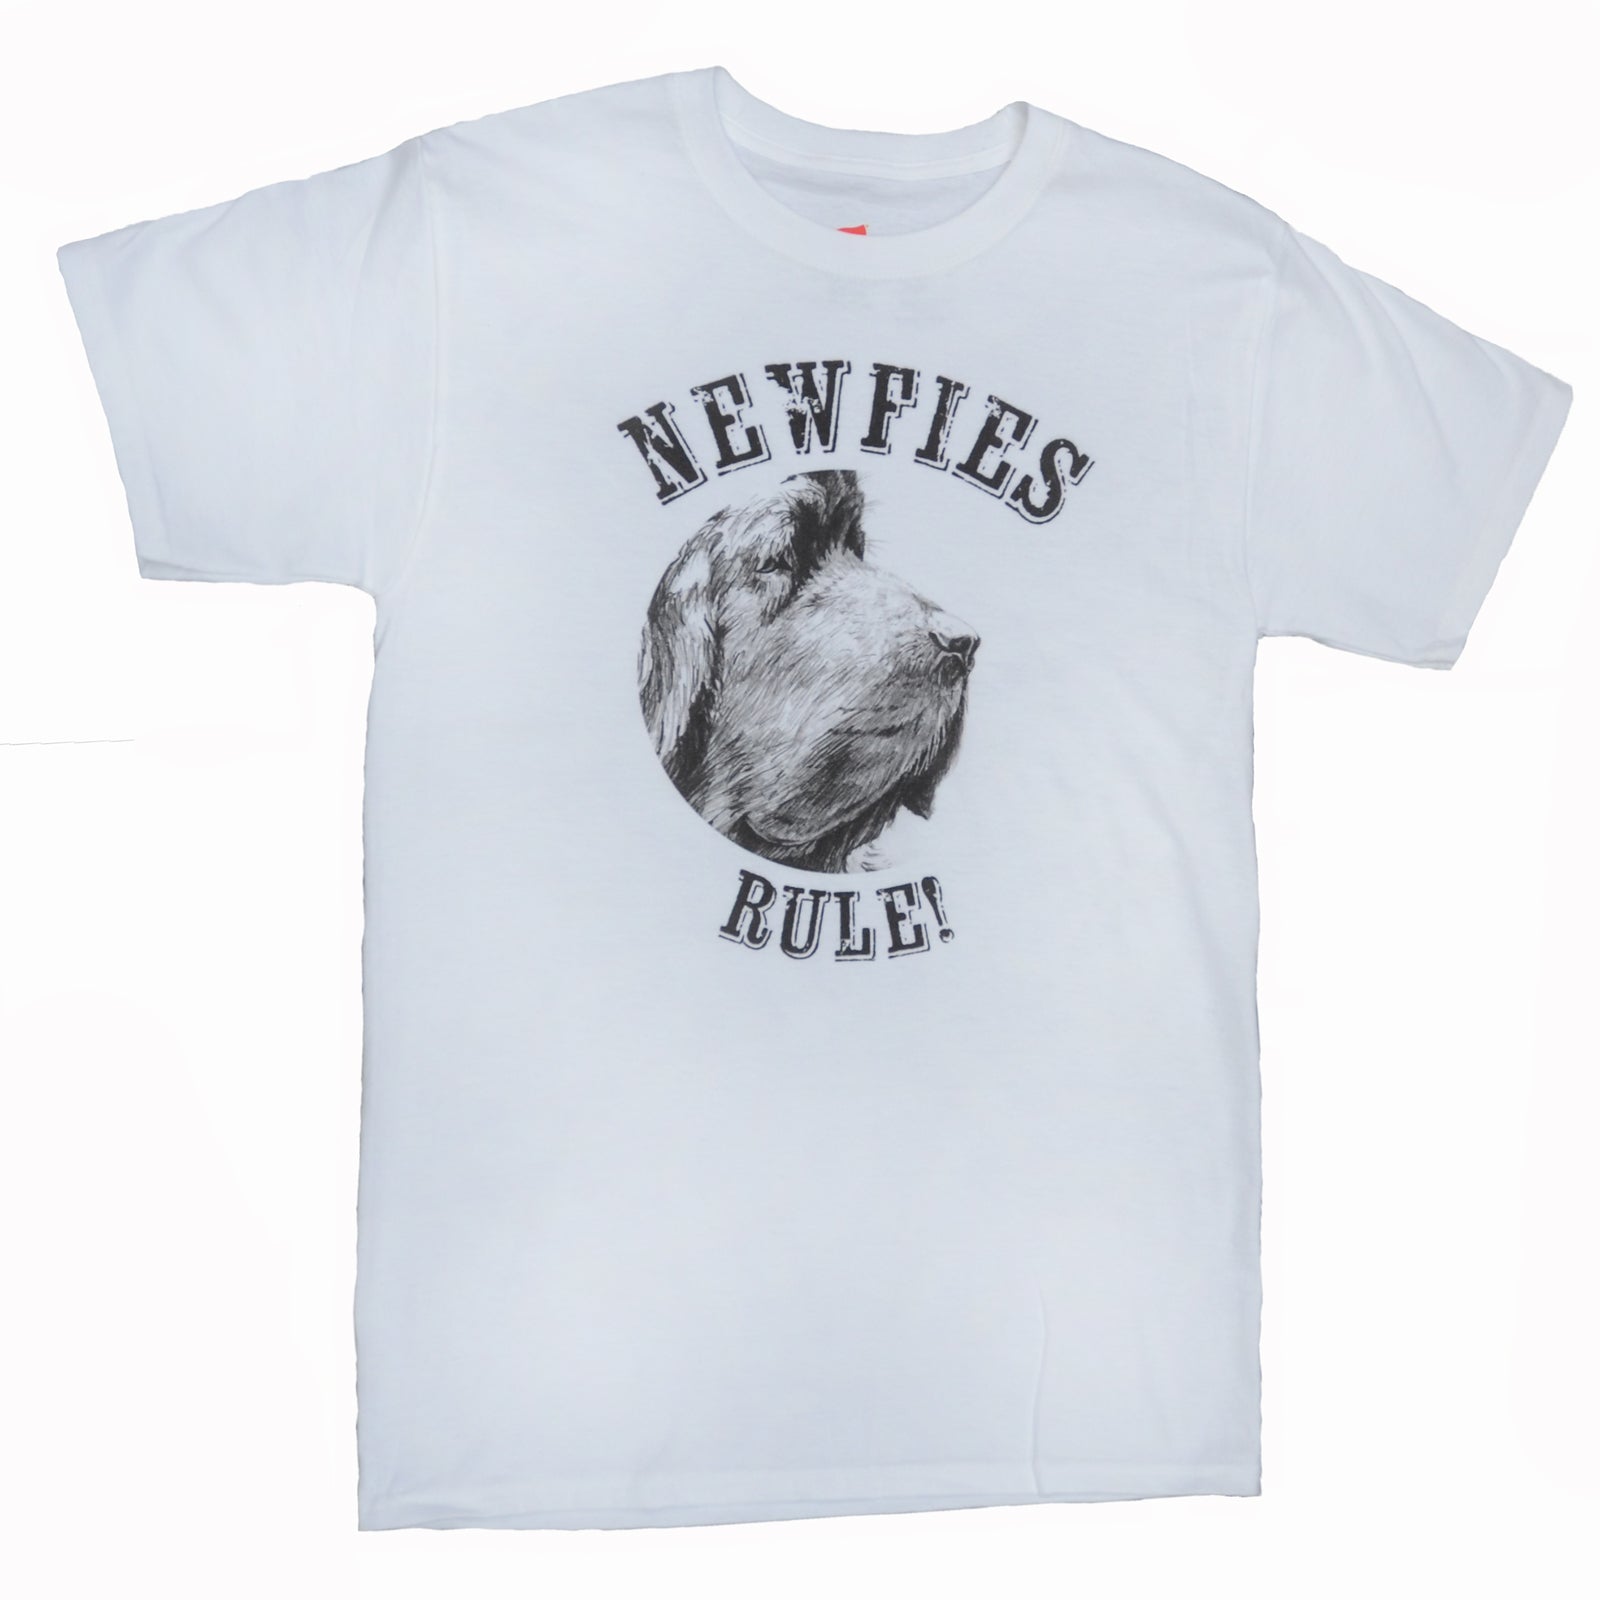 "Newfies Rule" - white cotton tee